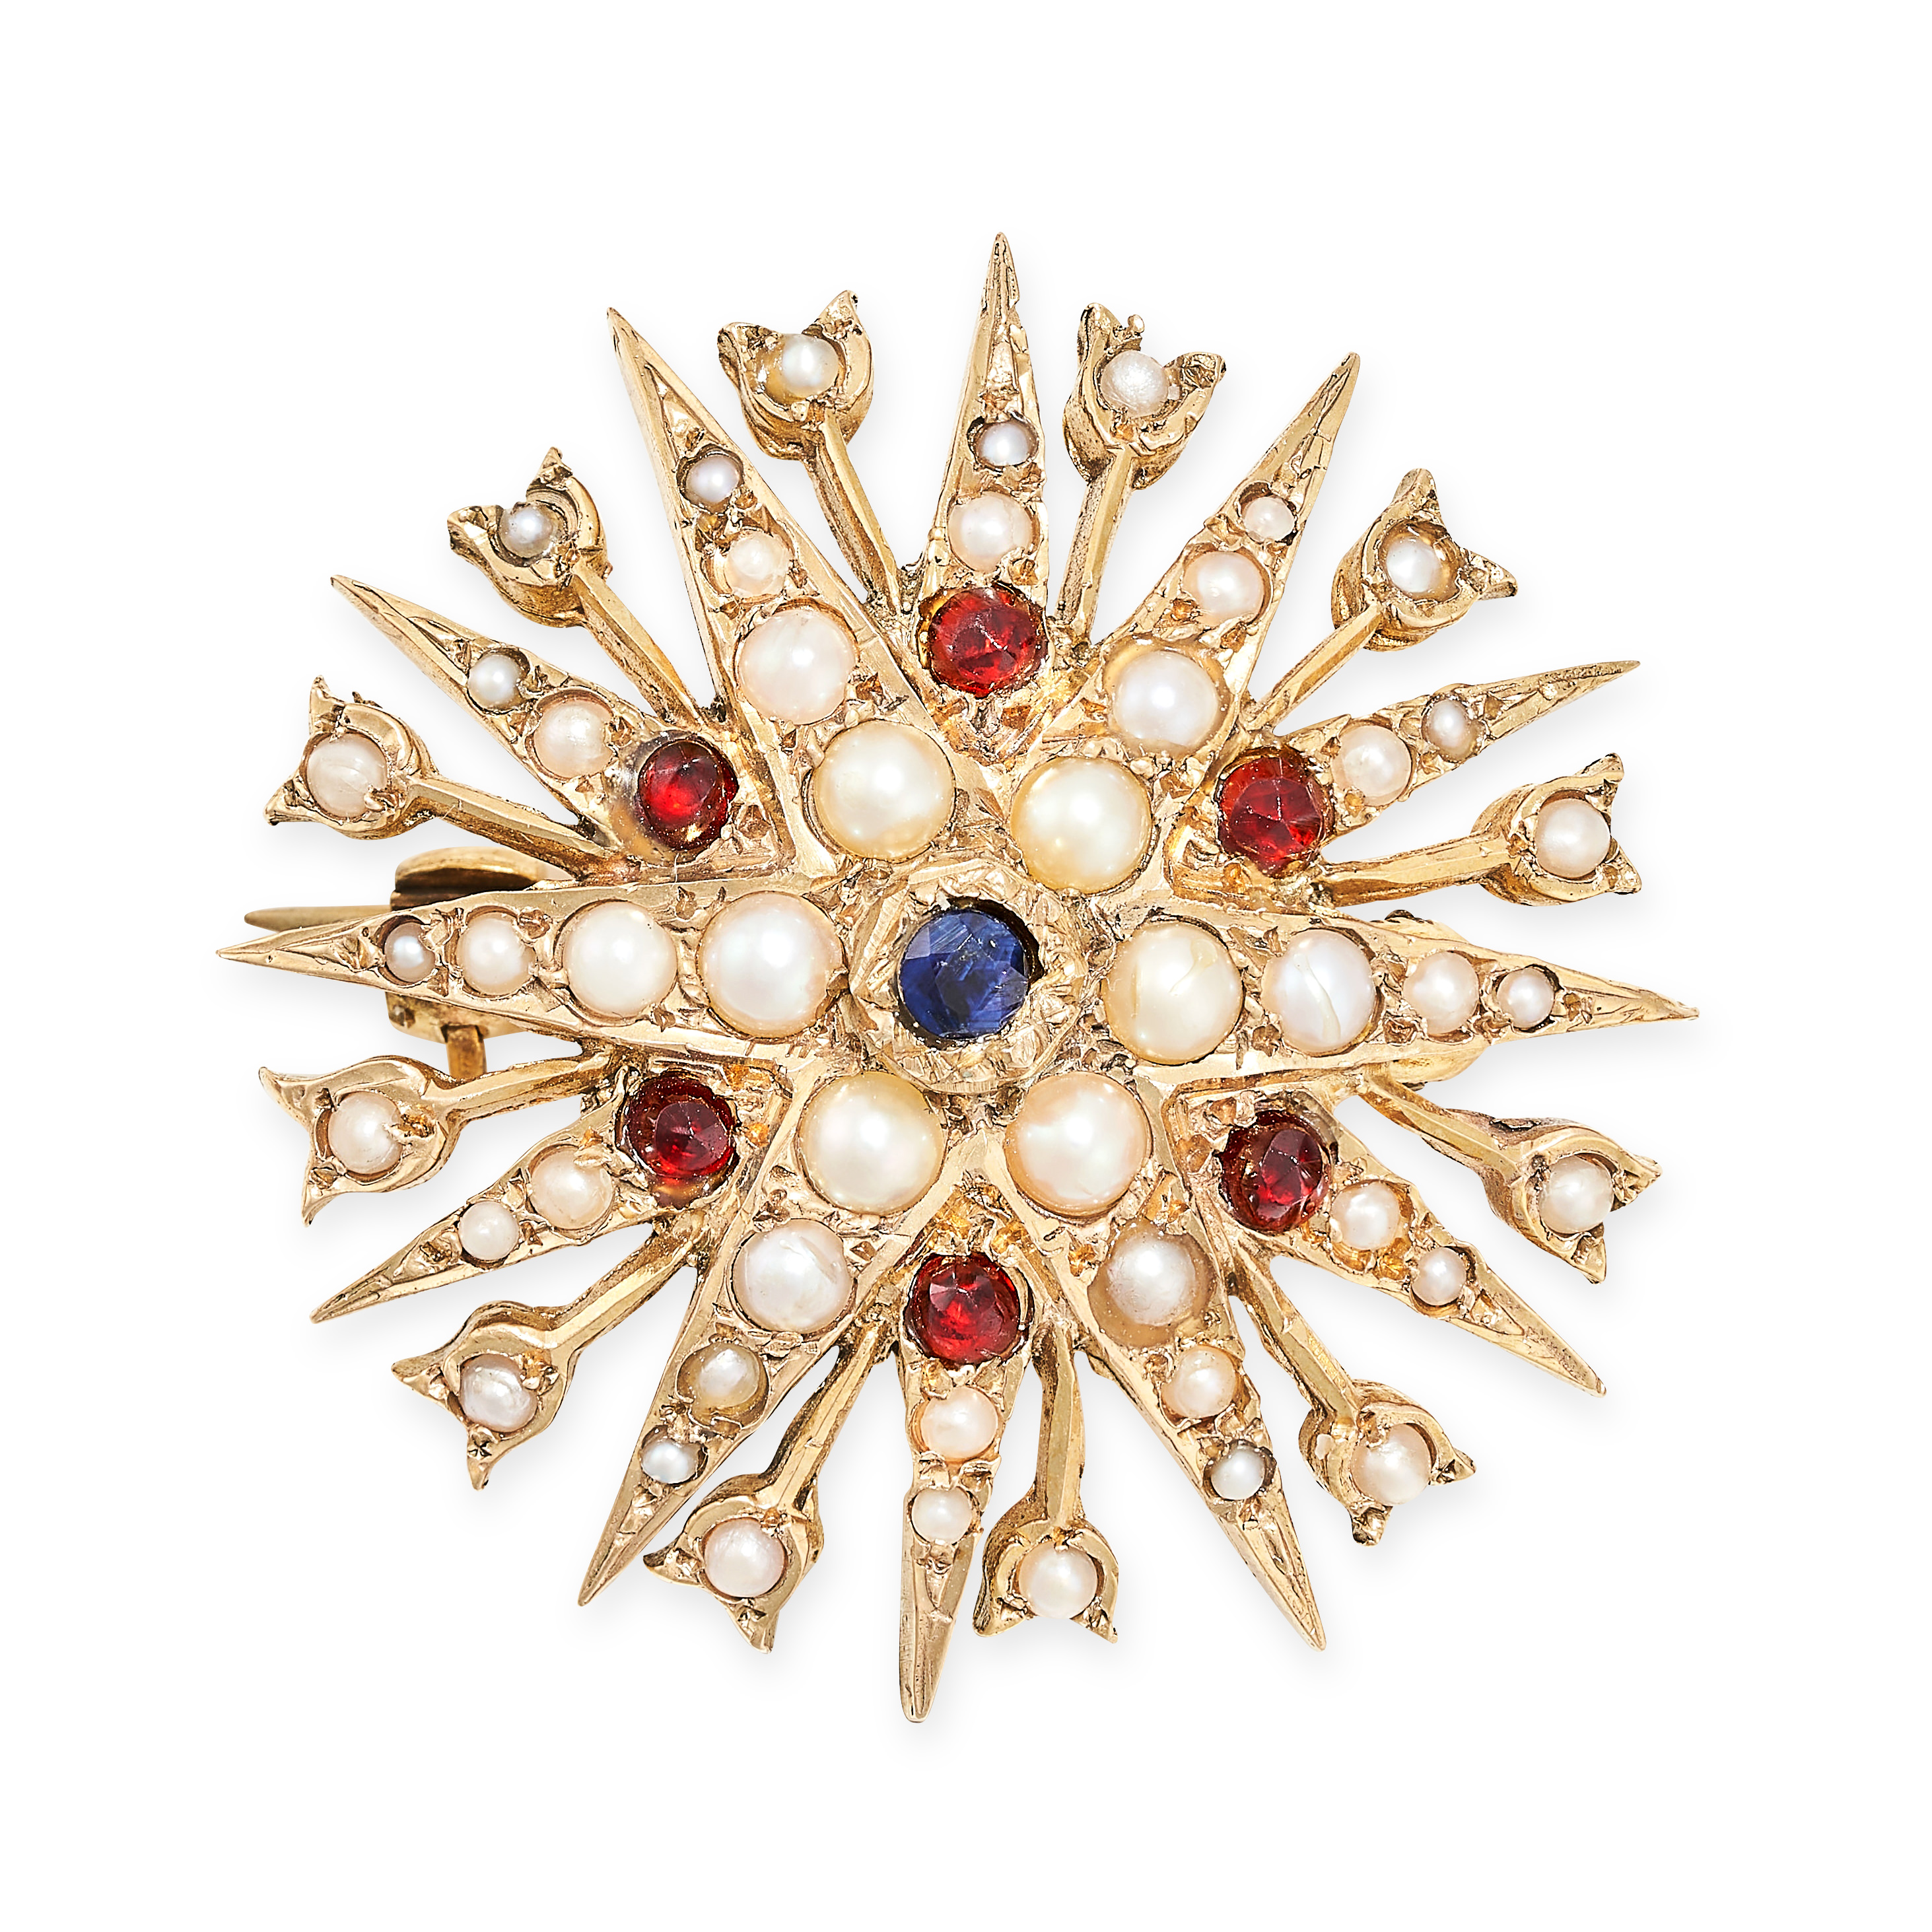 A VINTAGE PEARL, SAPPHIRE AND RED PASTE STAR BROOCH in 9ct yellow gold, designed as a twelve rayed